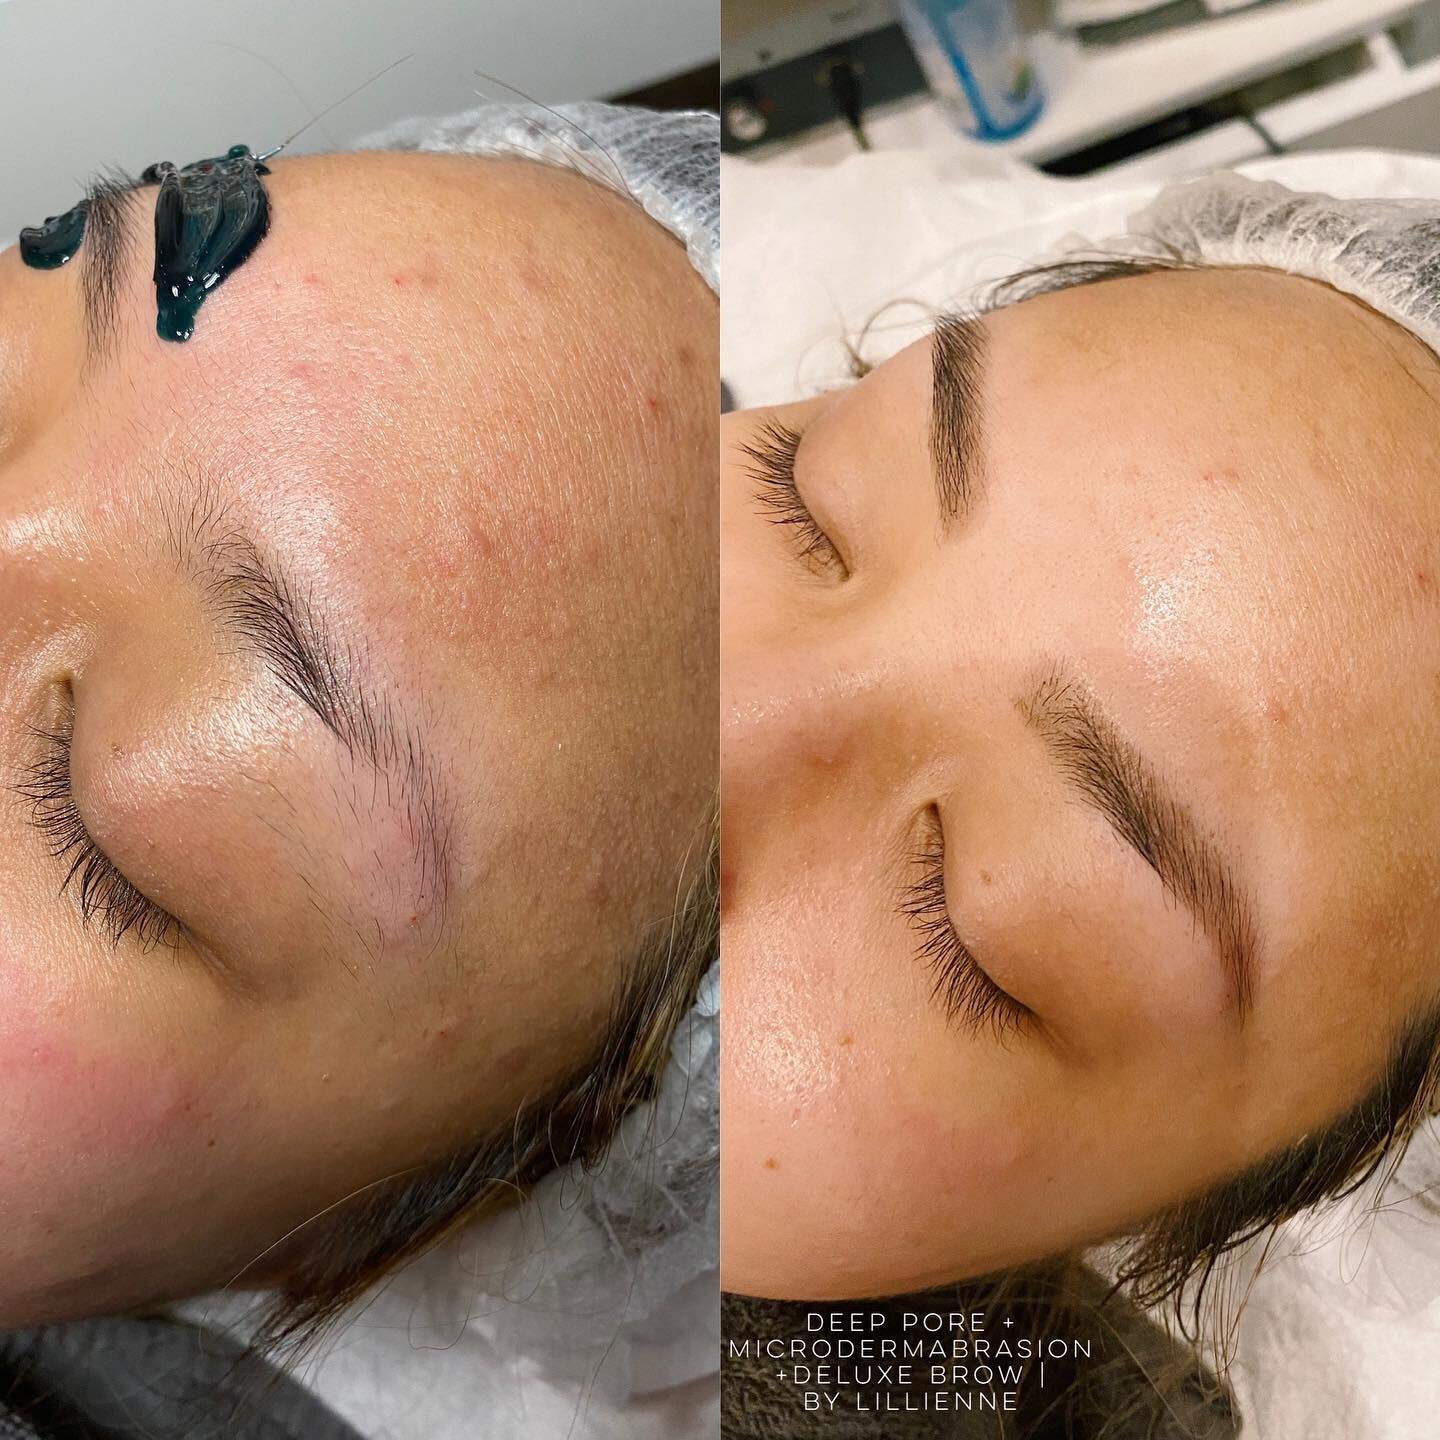 OK, Before I could wax my client&rsquo;s second brow I haaaaad to get a BEFORE photo (left). I did a Deep Pore Cleanse facial + Microdermabrasion with a Deluxe Brow Service. And I&rsquo;m just in awe at the AFTER photo. 😍😍😍✨🙌🏻 #winningskin #trus